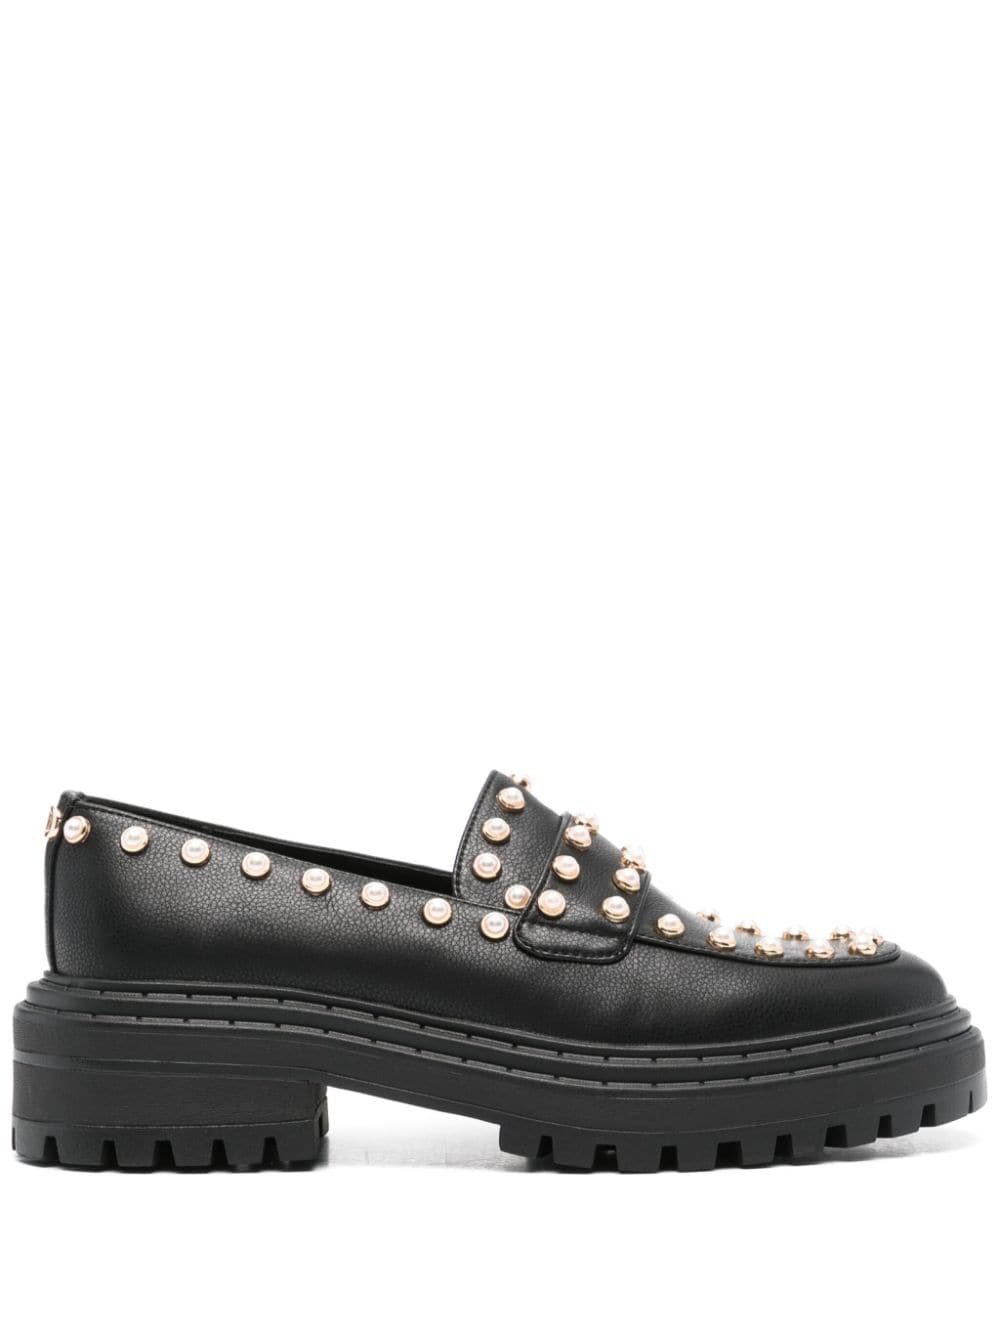 TWINSET embellished leather loafers - Black von TWINSET